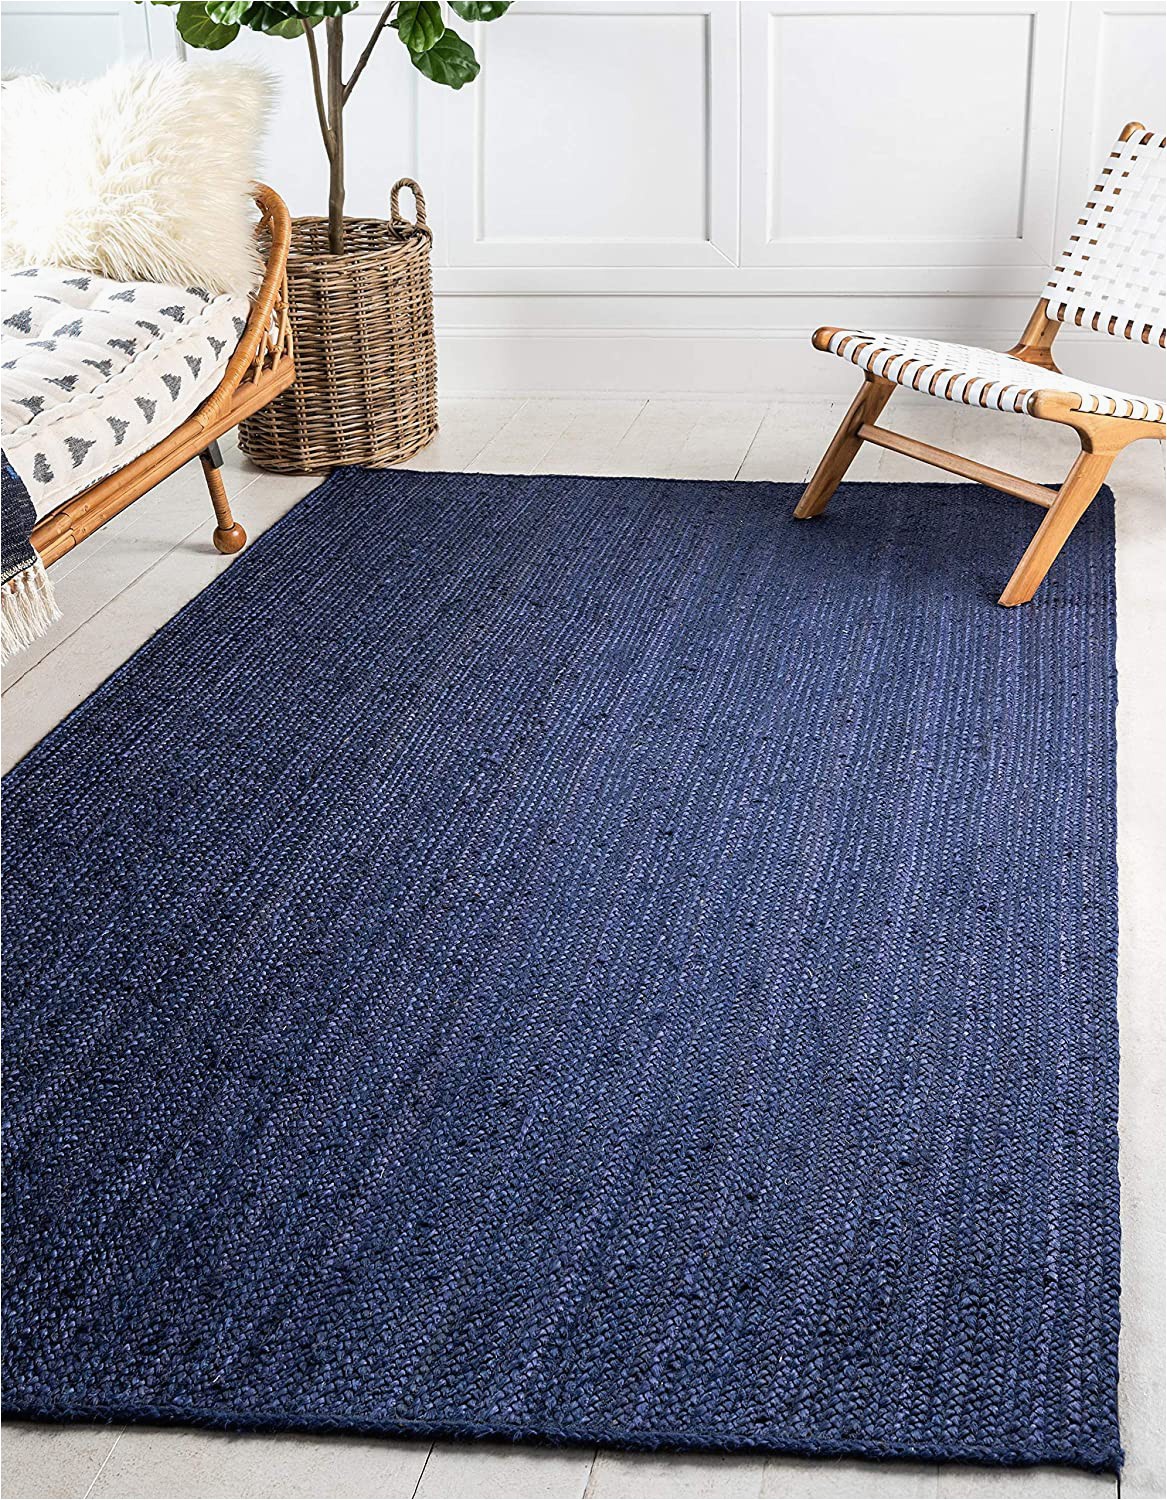 Amazon Navy Blue Rug Unique Loom Braided Jute Collection Hand Woven Natural Fibers Navy Blue Dark Blue area Rug 9 0 X 12 0